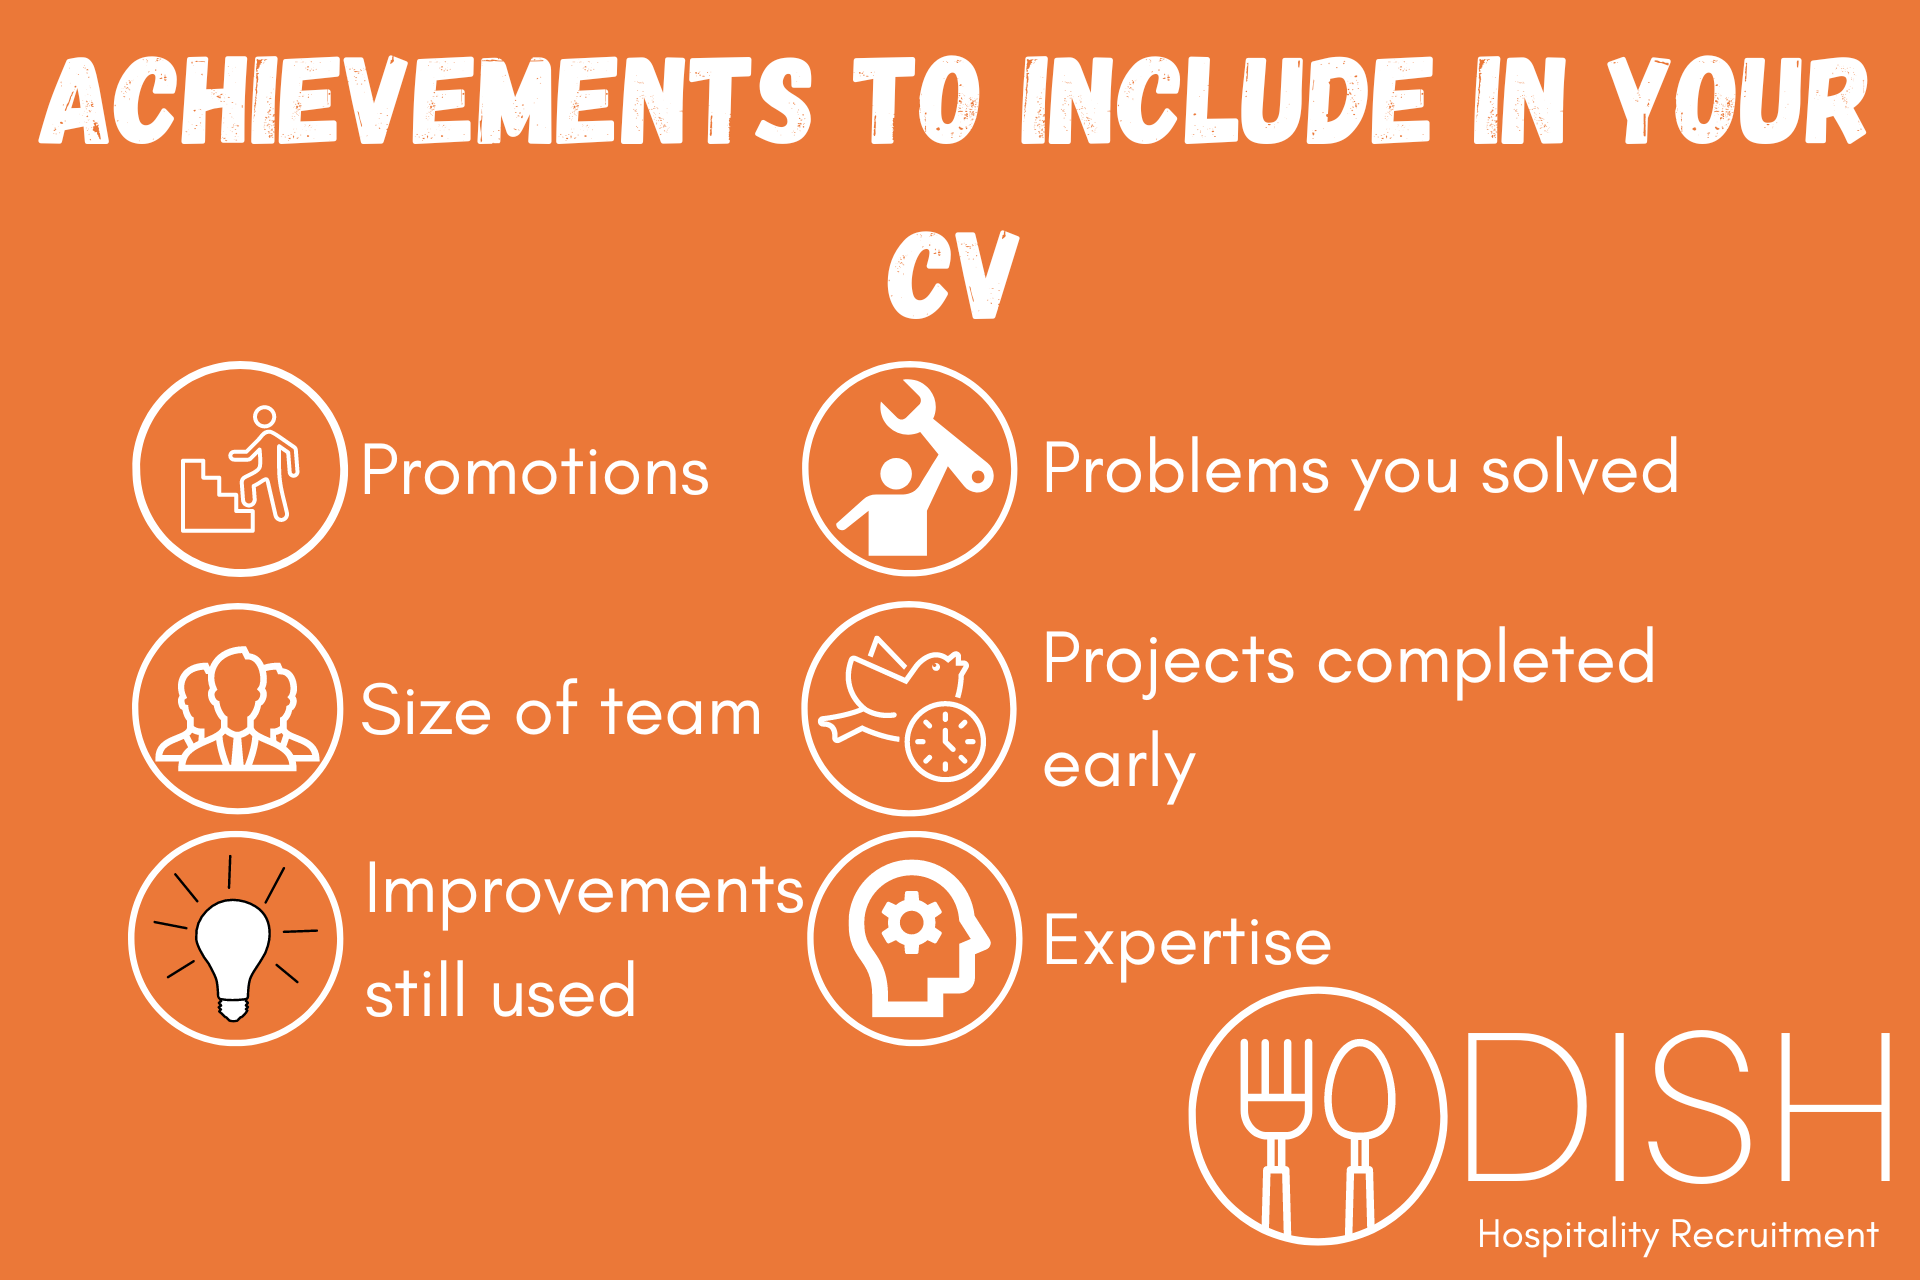 6 Achievements to Include in Your CV